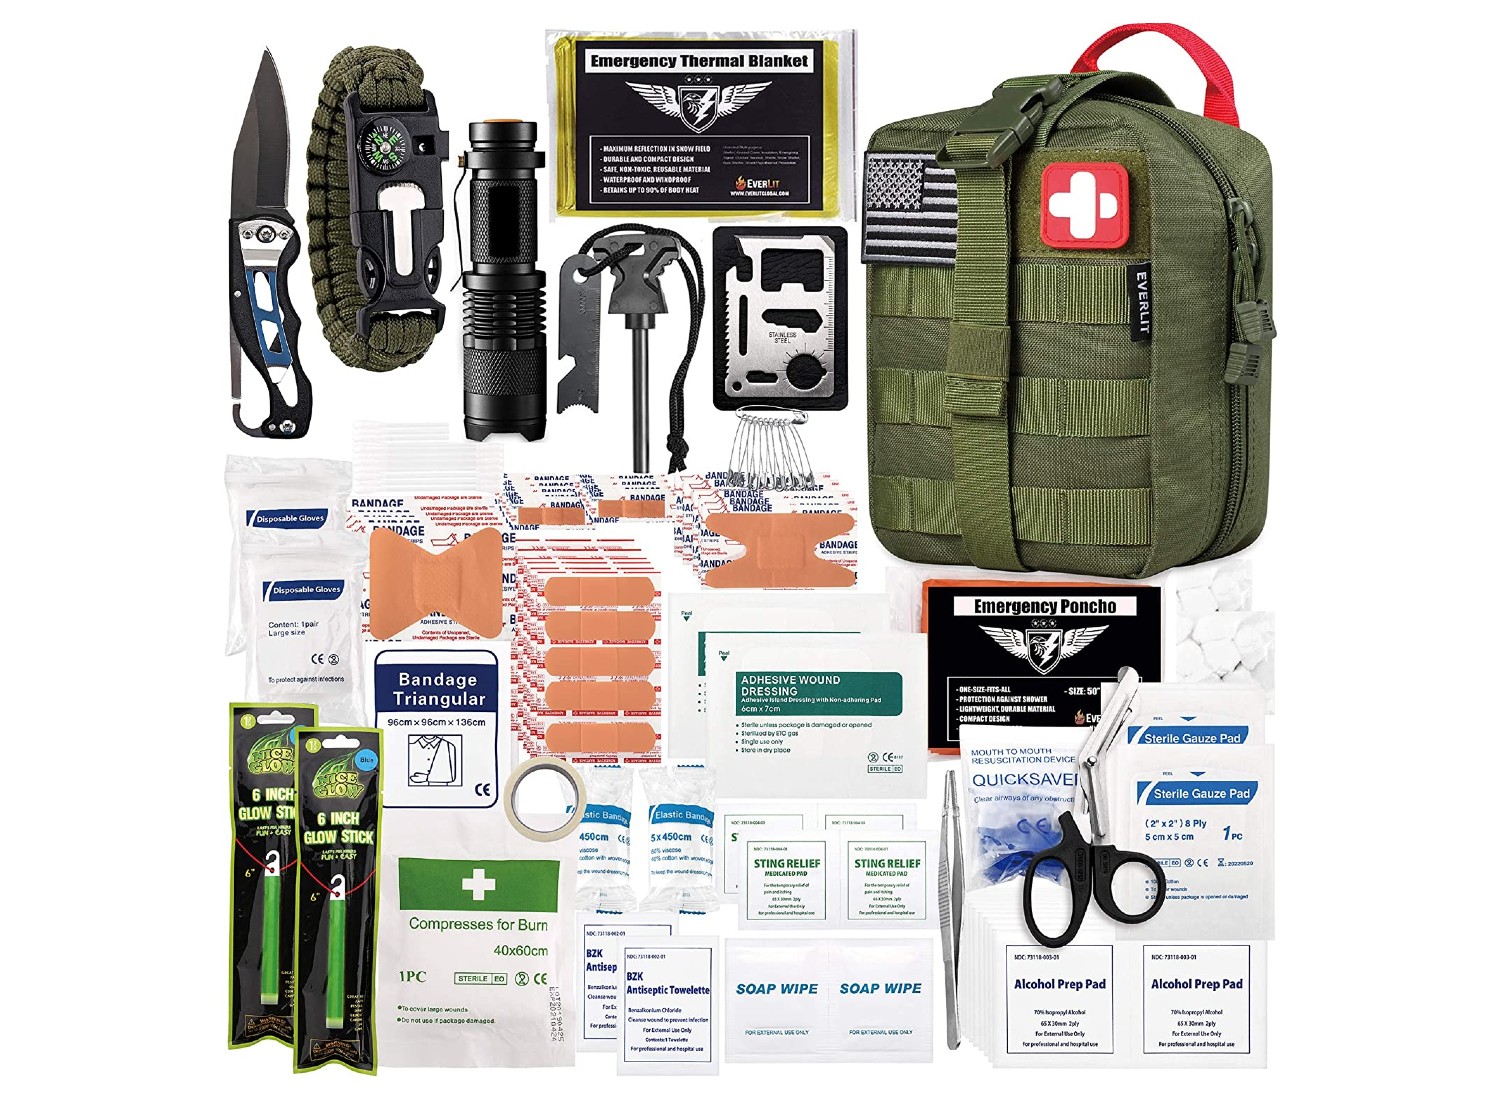 The 8 best first aid kits of 2023, according to experts